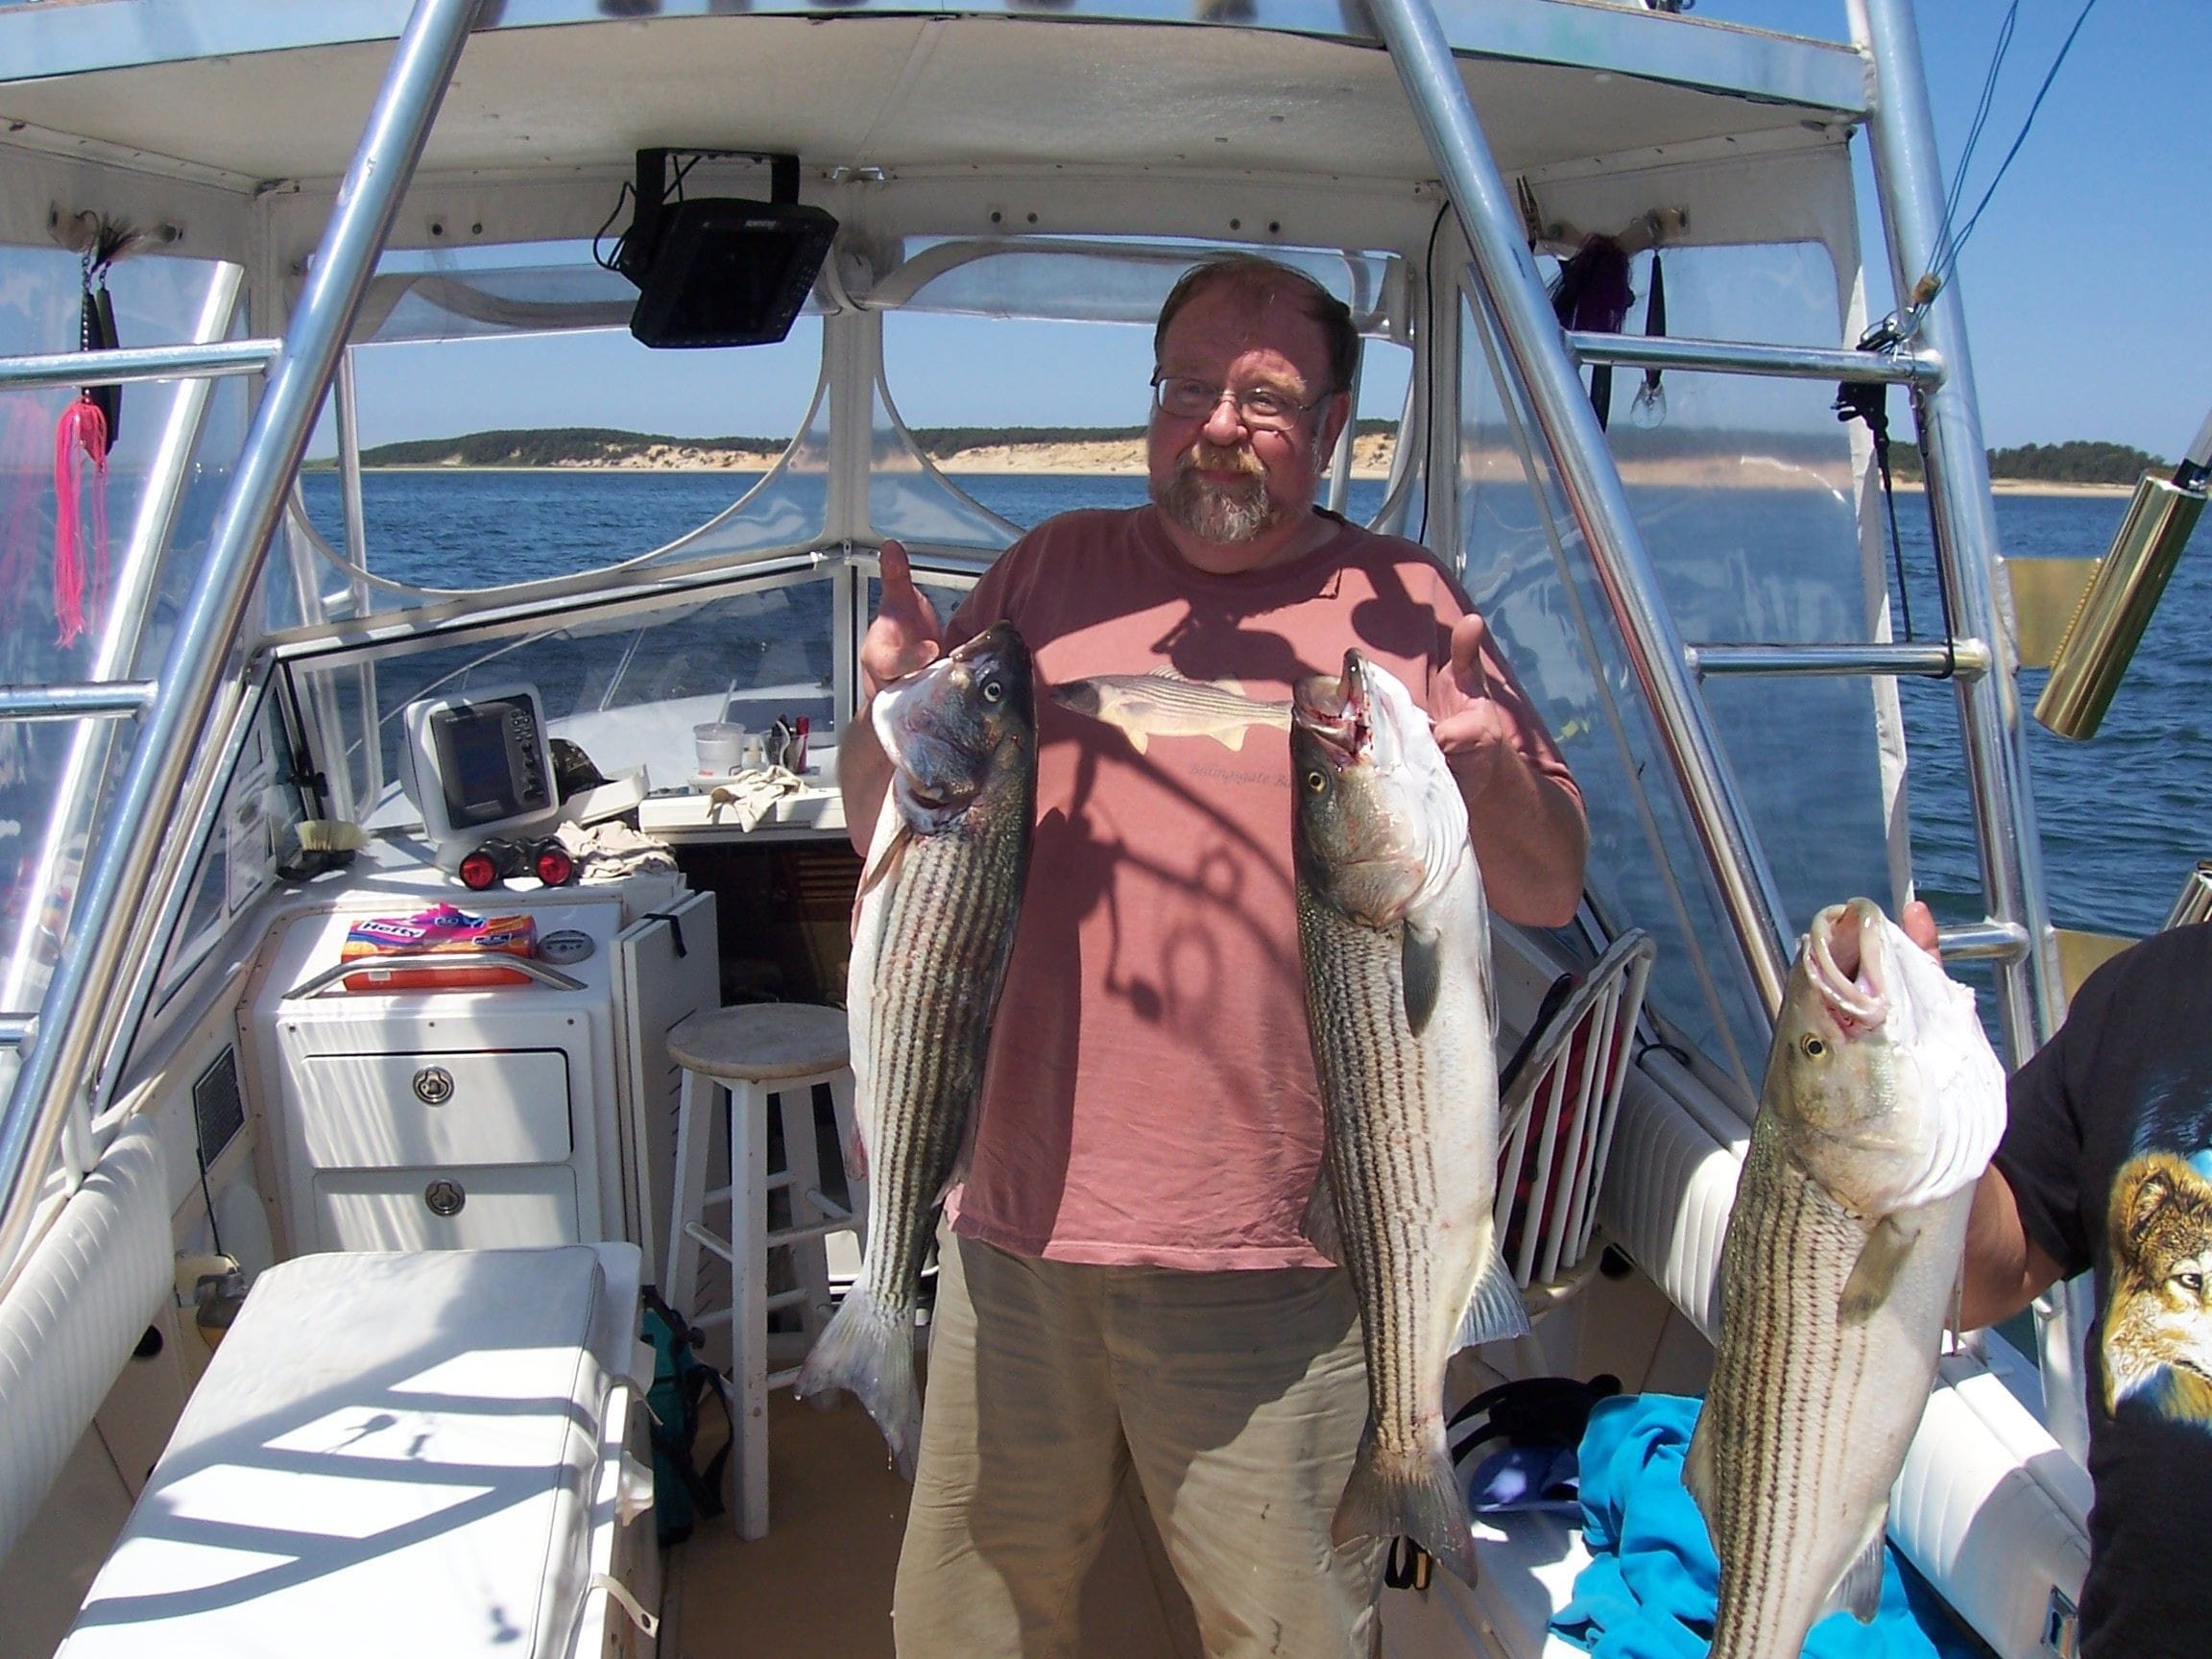 Man with Pink Shirt Holding Two Striper Fish